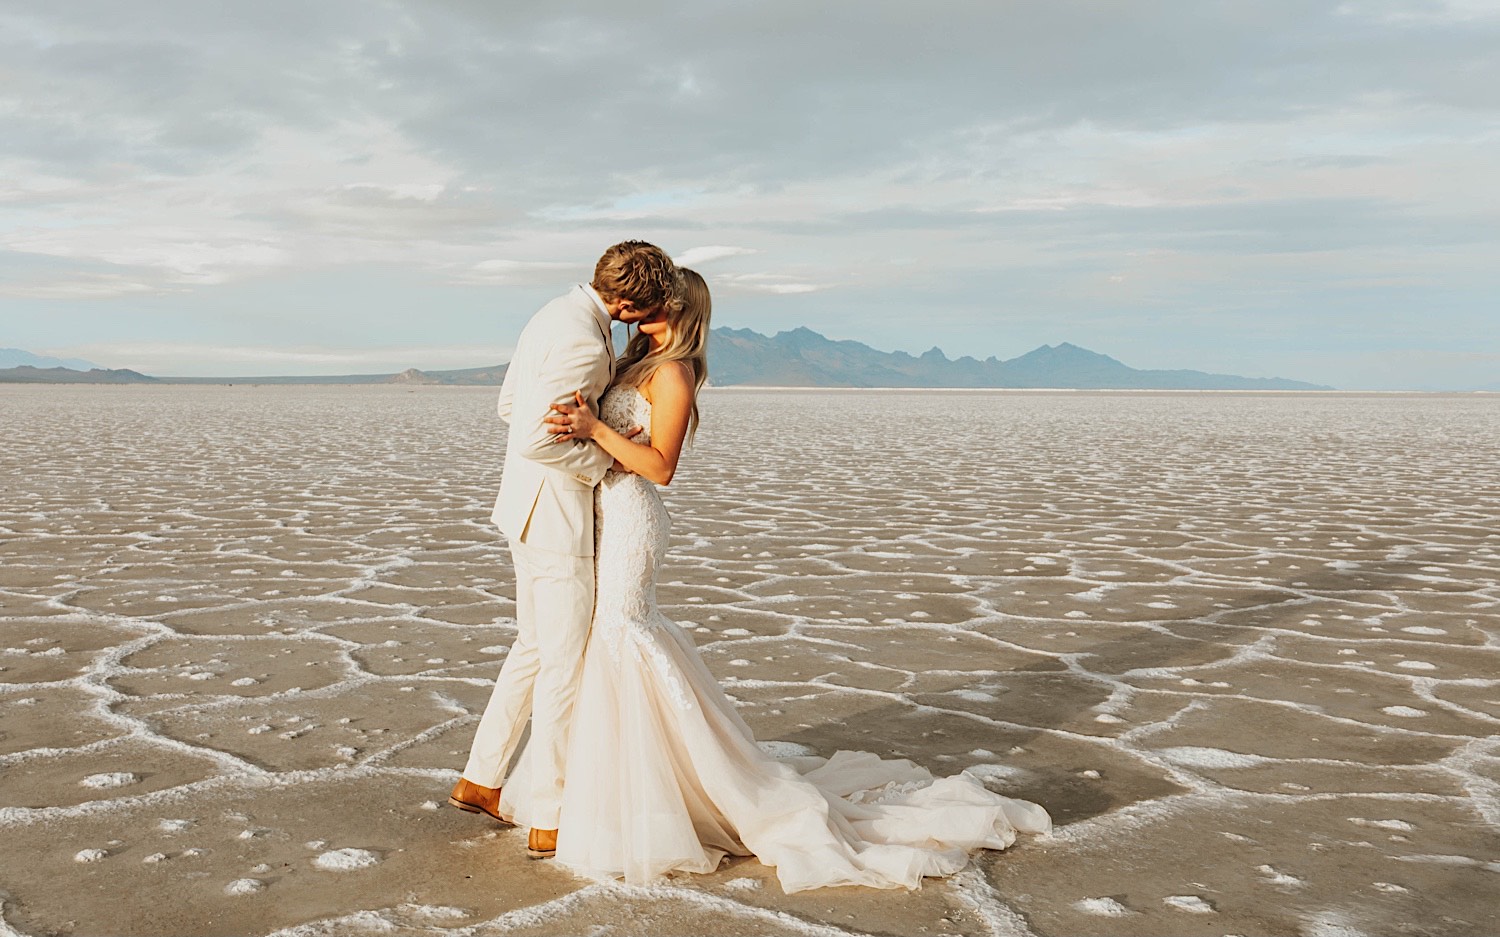 At their elopement in the Utah Salt Flats a bride and groom in their wedding attire kiss one another